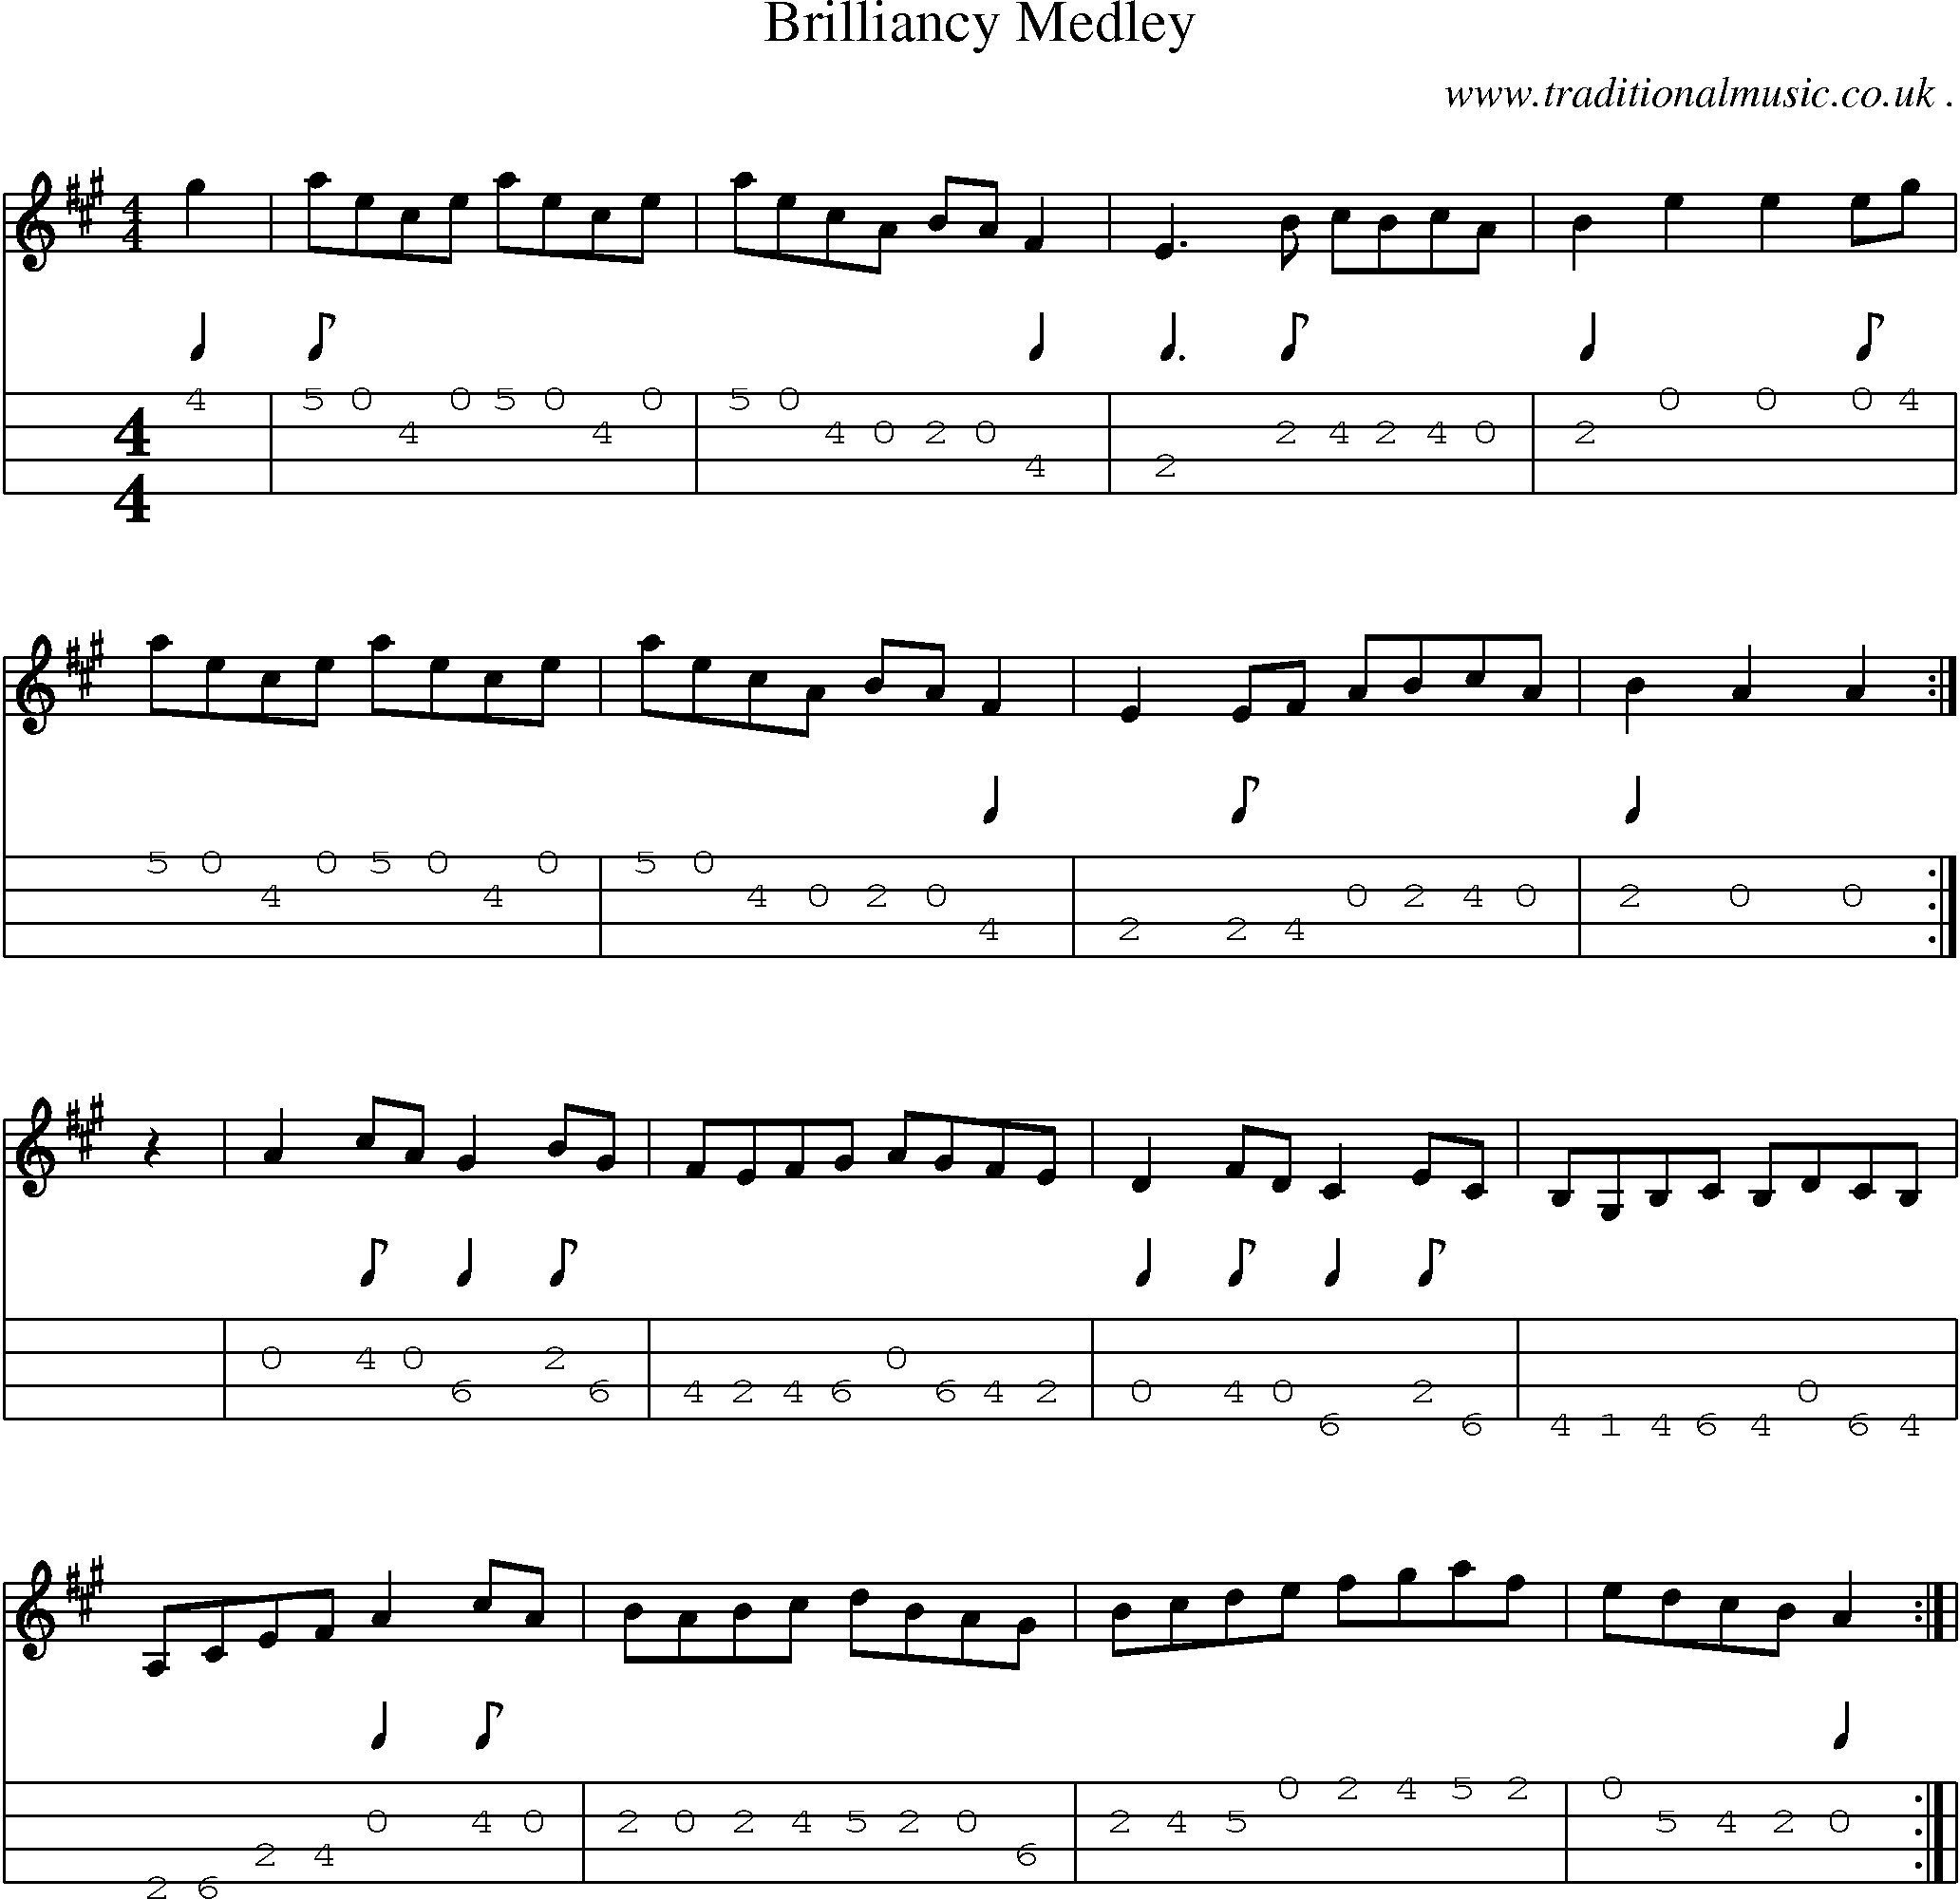 Music Score and Mandolin Tabs for Brilliancy Medley